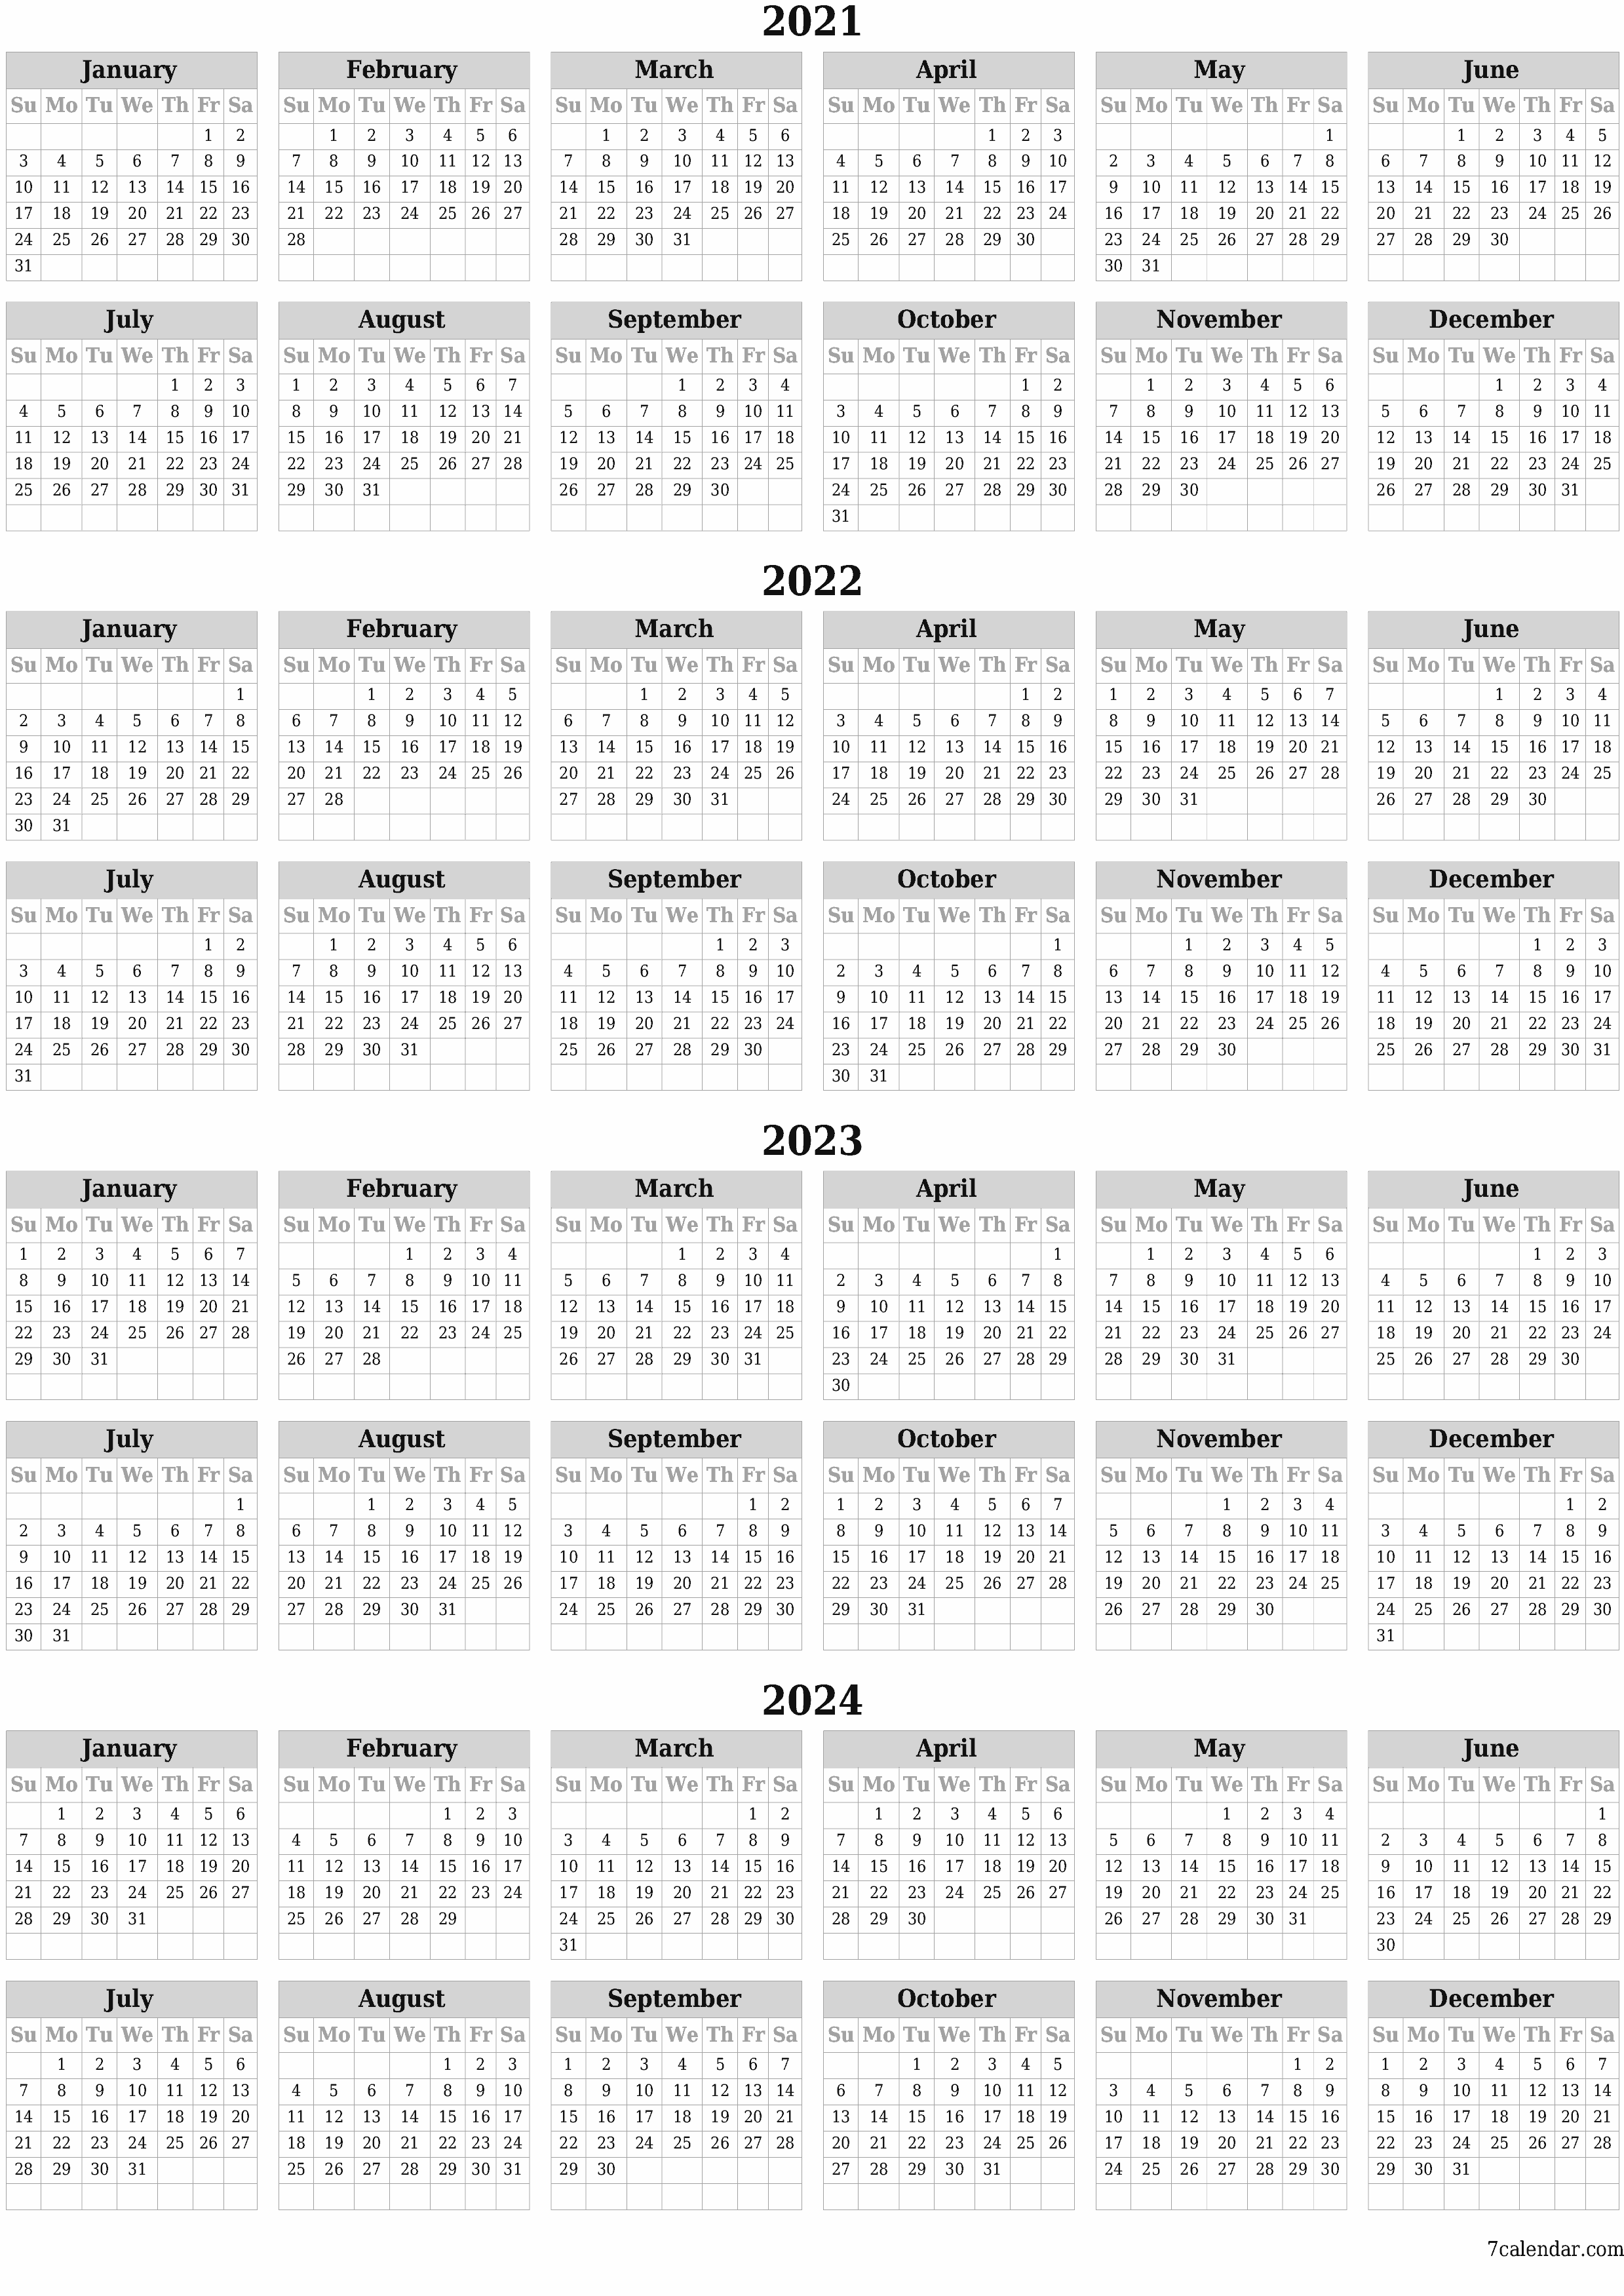 Blank yearly dated HD template image of calendar for year 2021, 2022, 2023, 2024 save and print to PDF PNG English - 7calendar.com